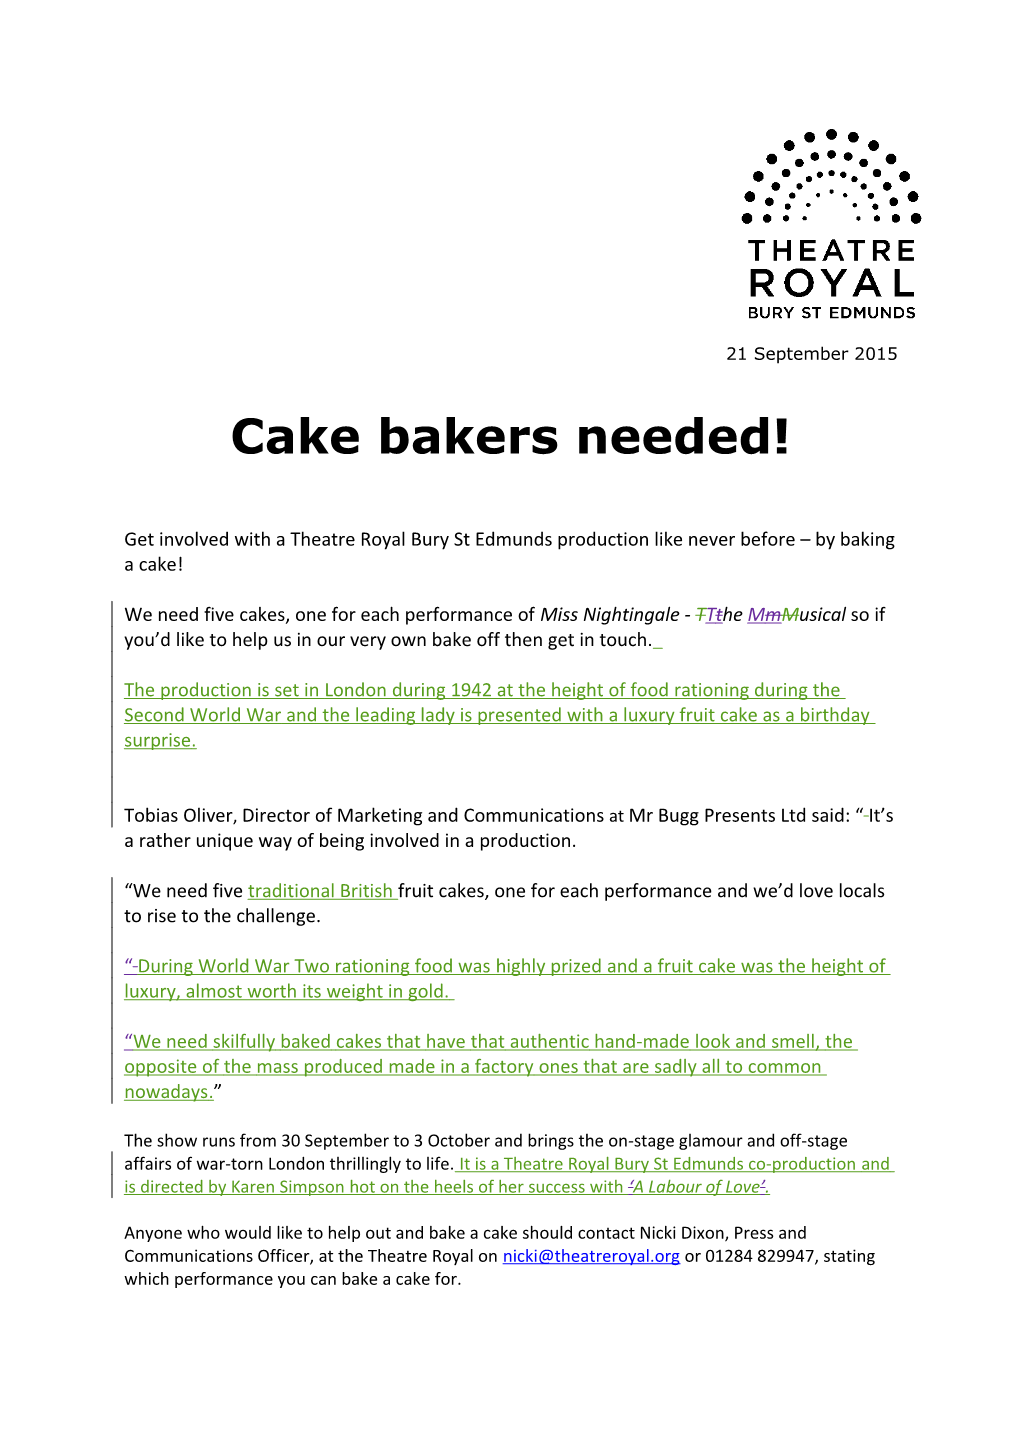 Cake Bakers Needed!